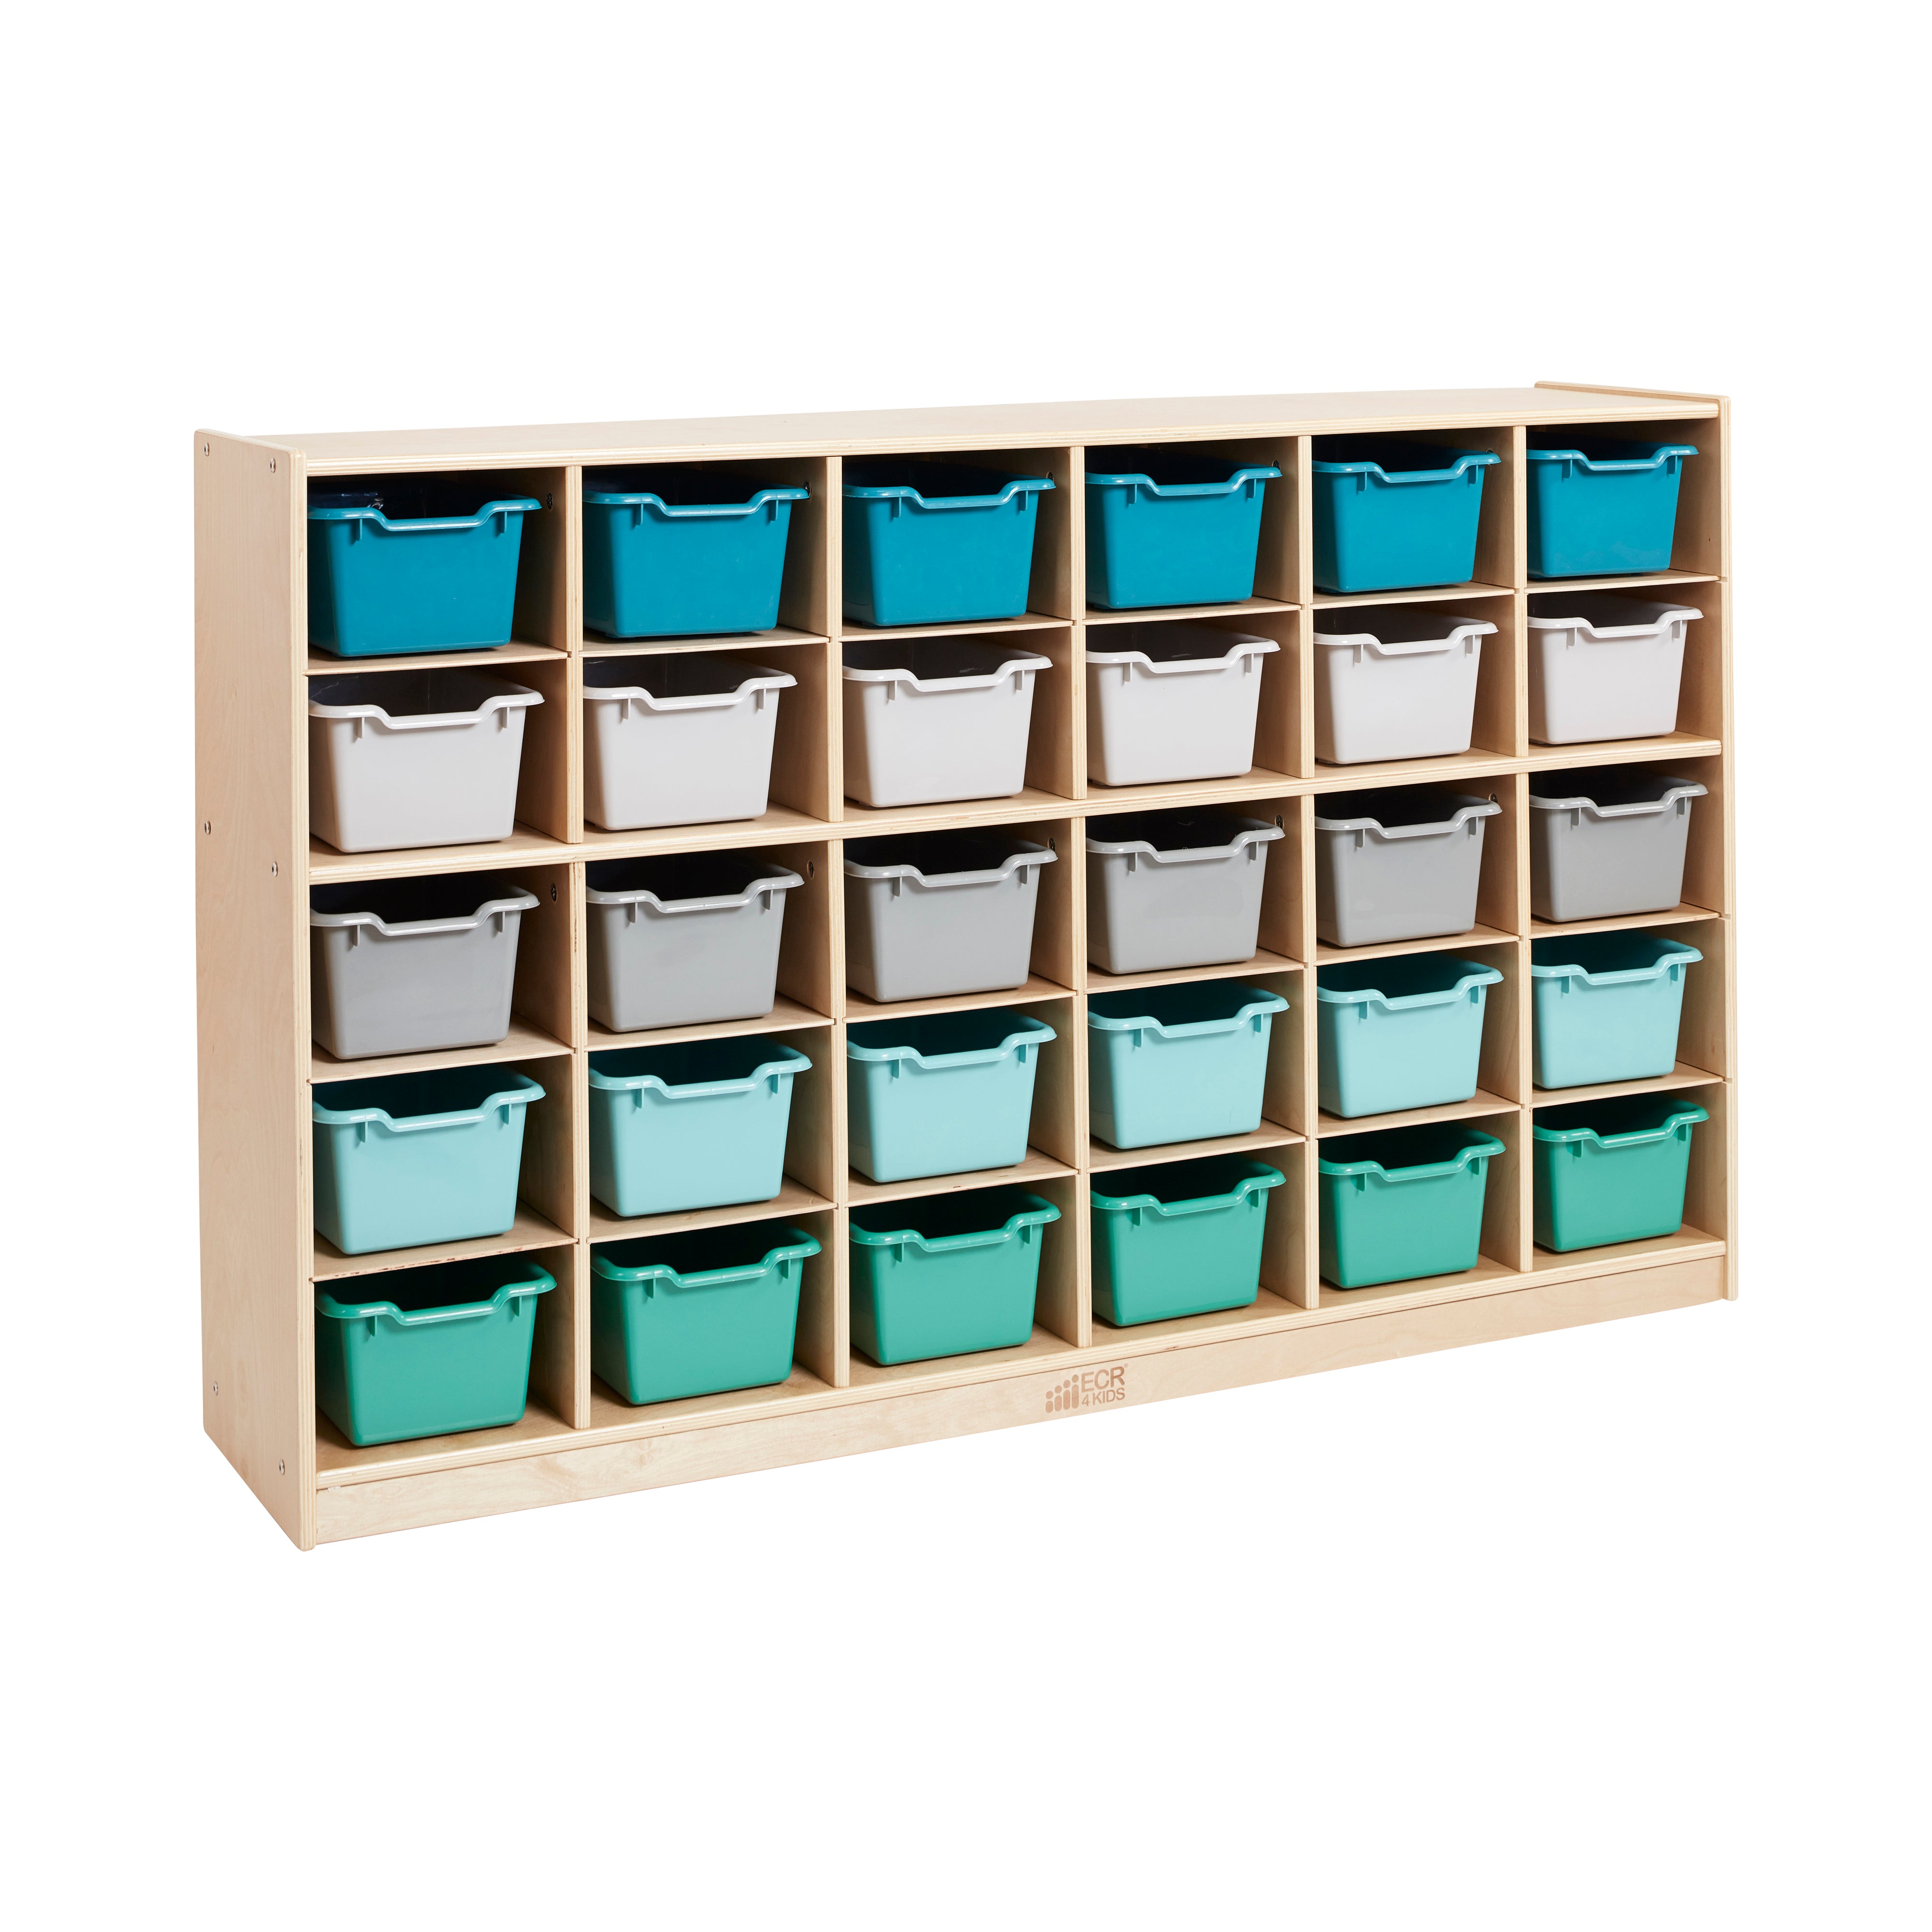 30 Cubby Tray Cabinet with Scoop Front Storage Bins, 5x6, Natural, Classroom Furniture